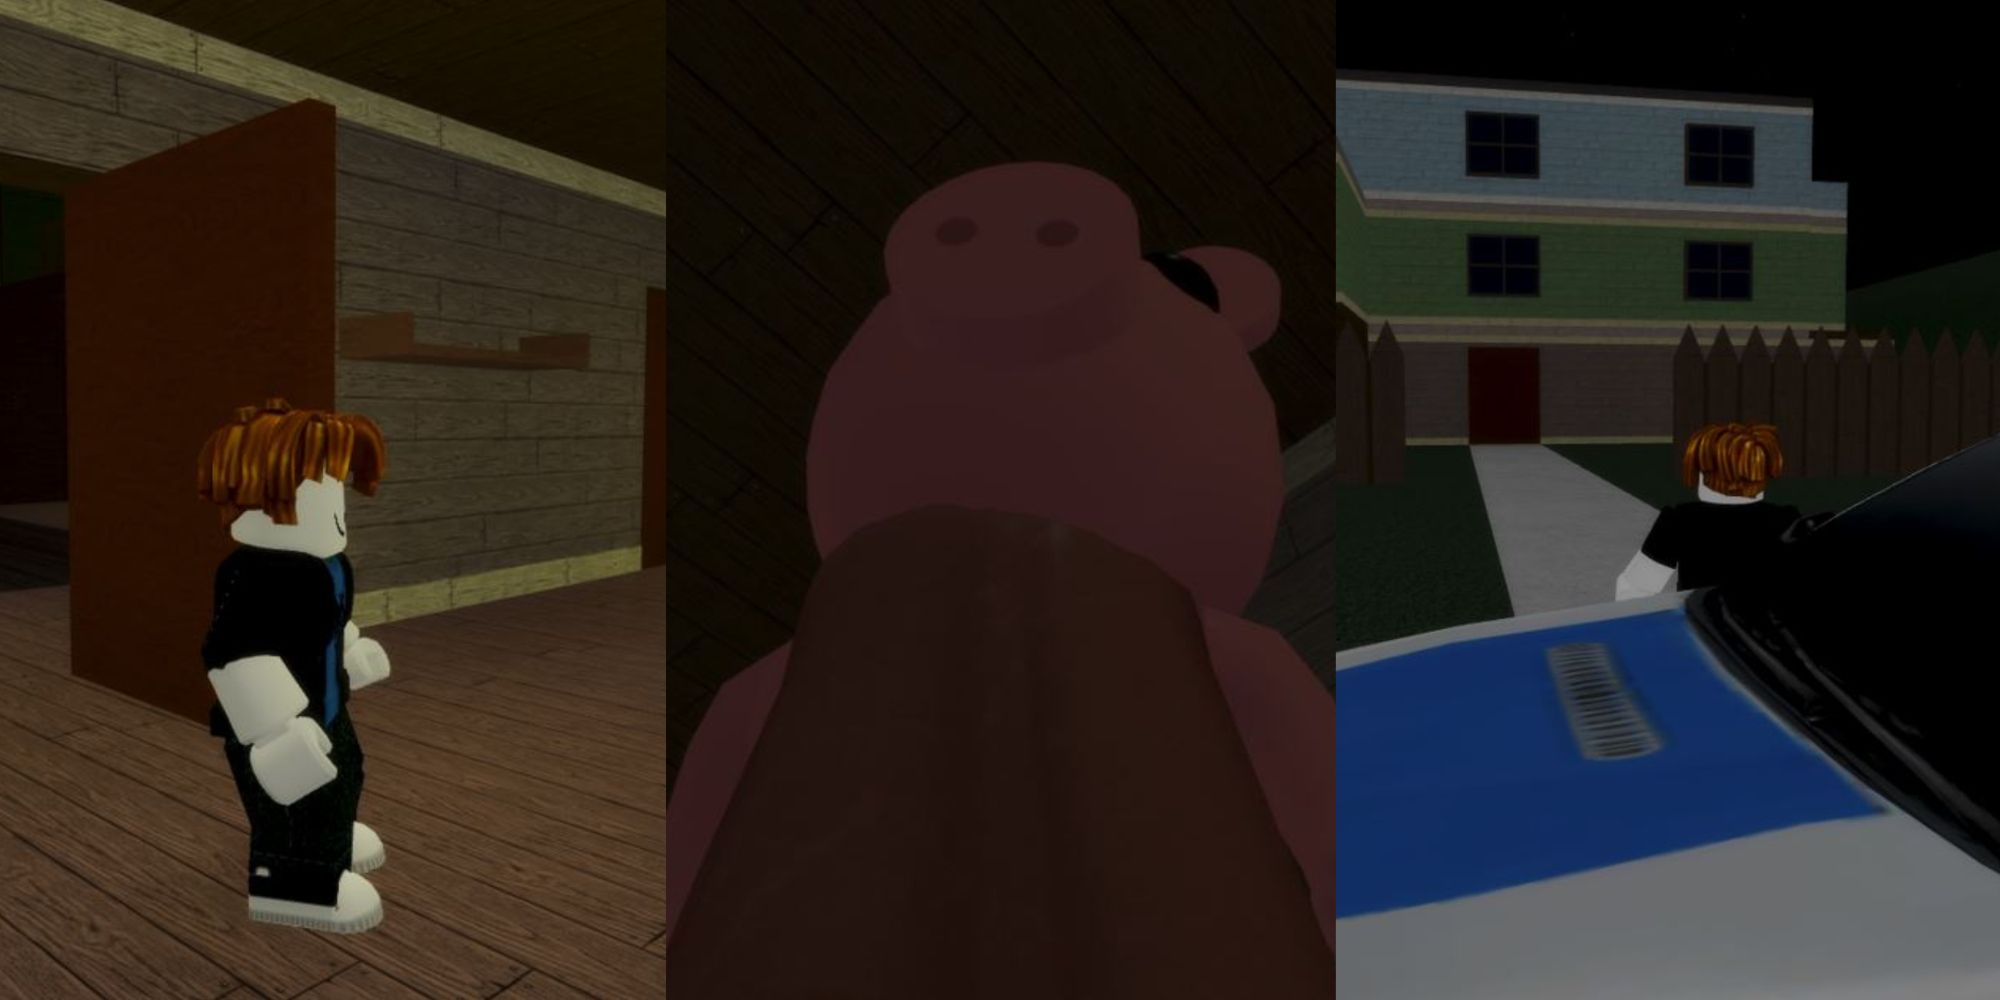 I tried getting BANNED in Piggy.. (Roblox) 